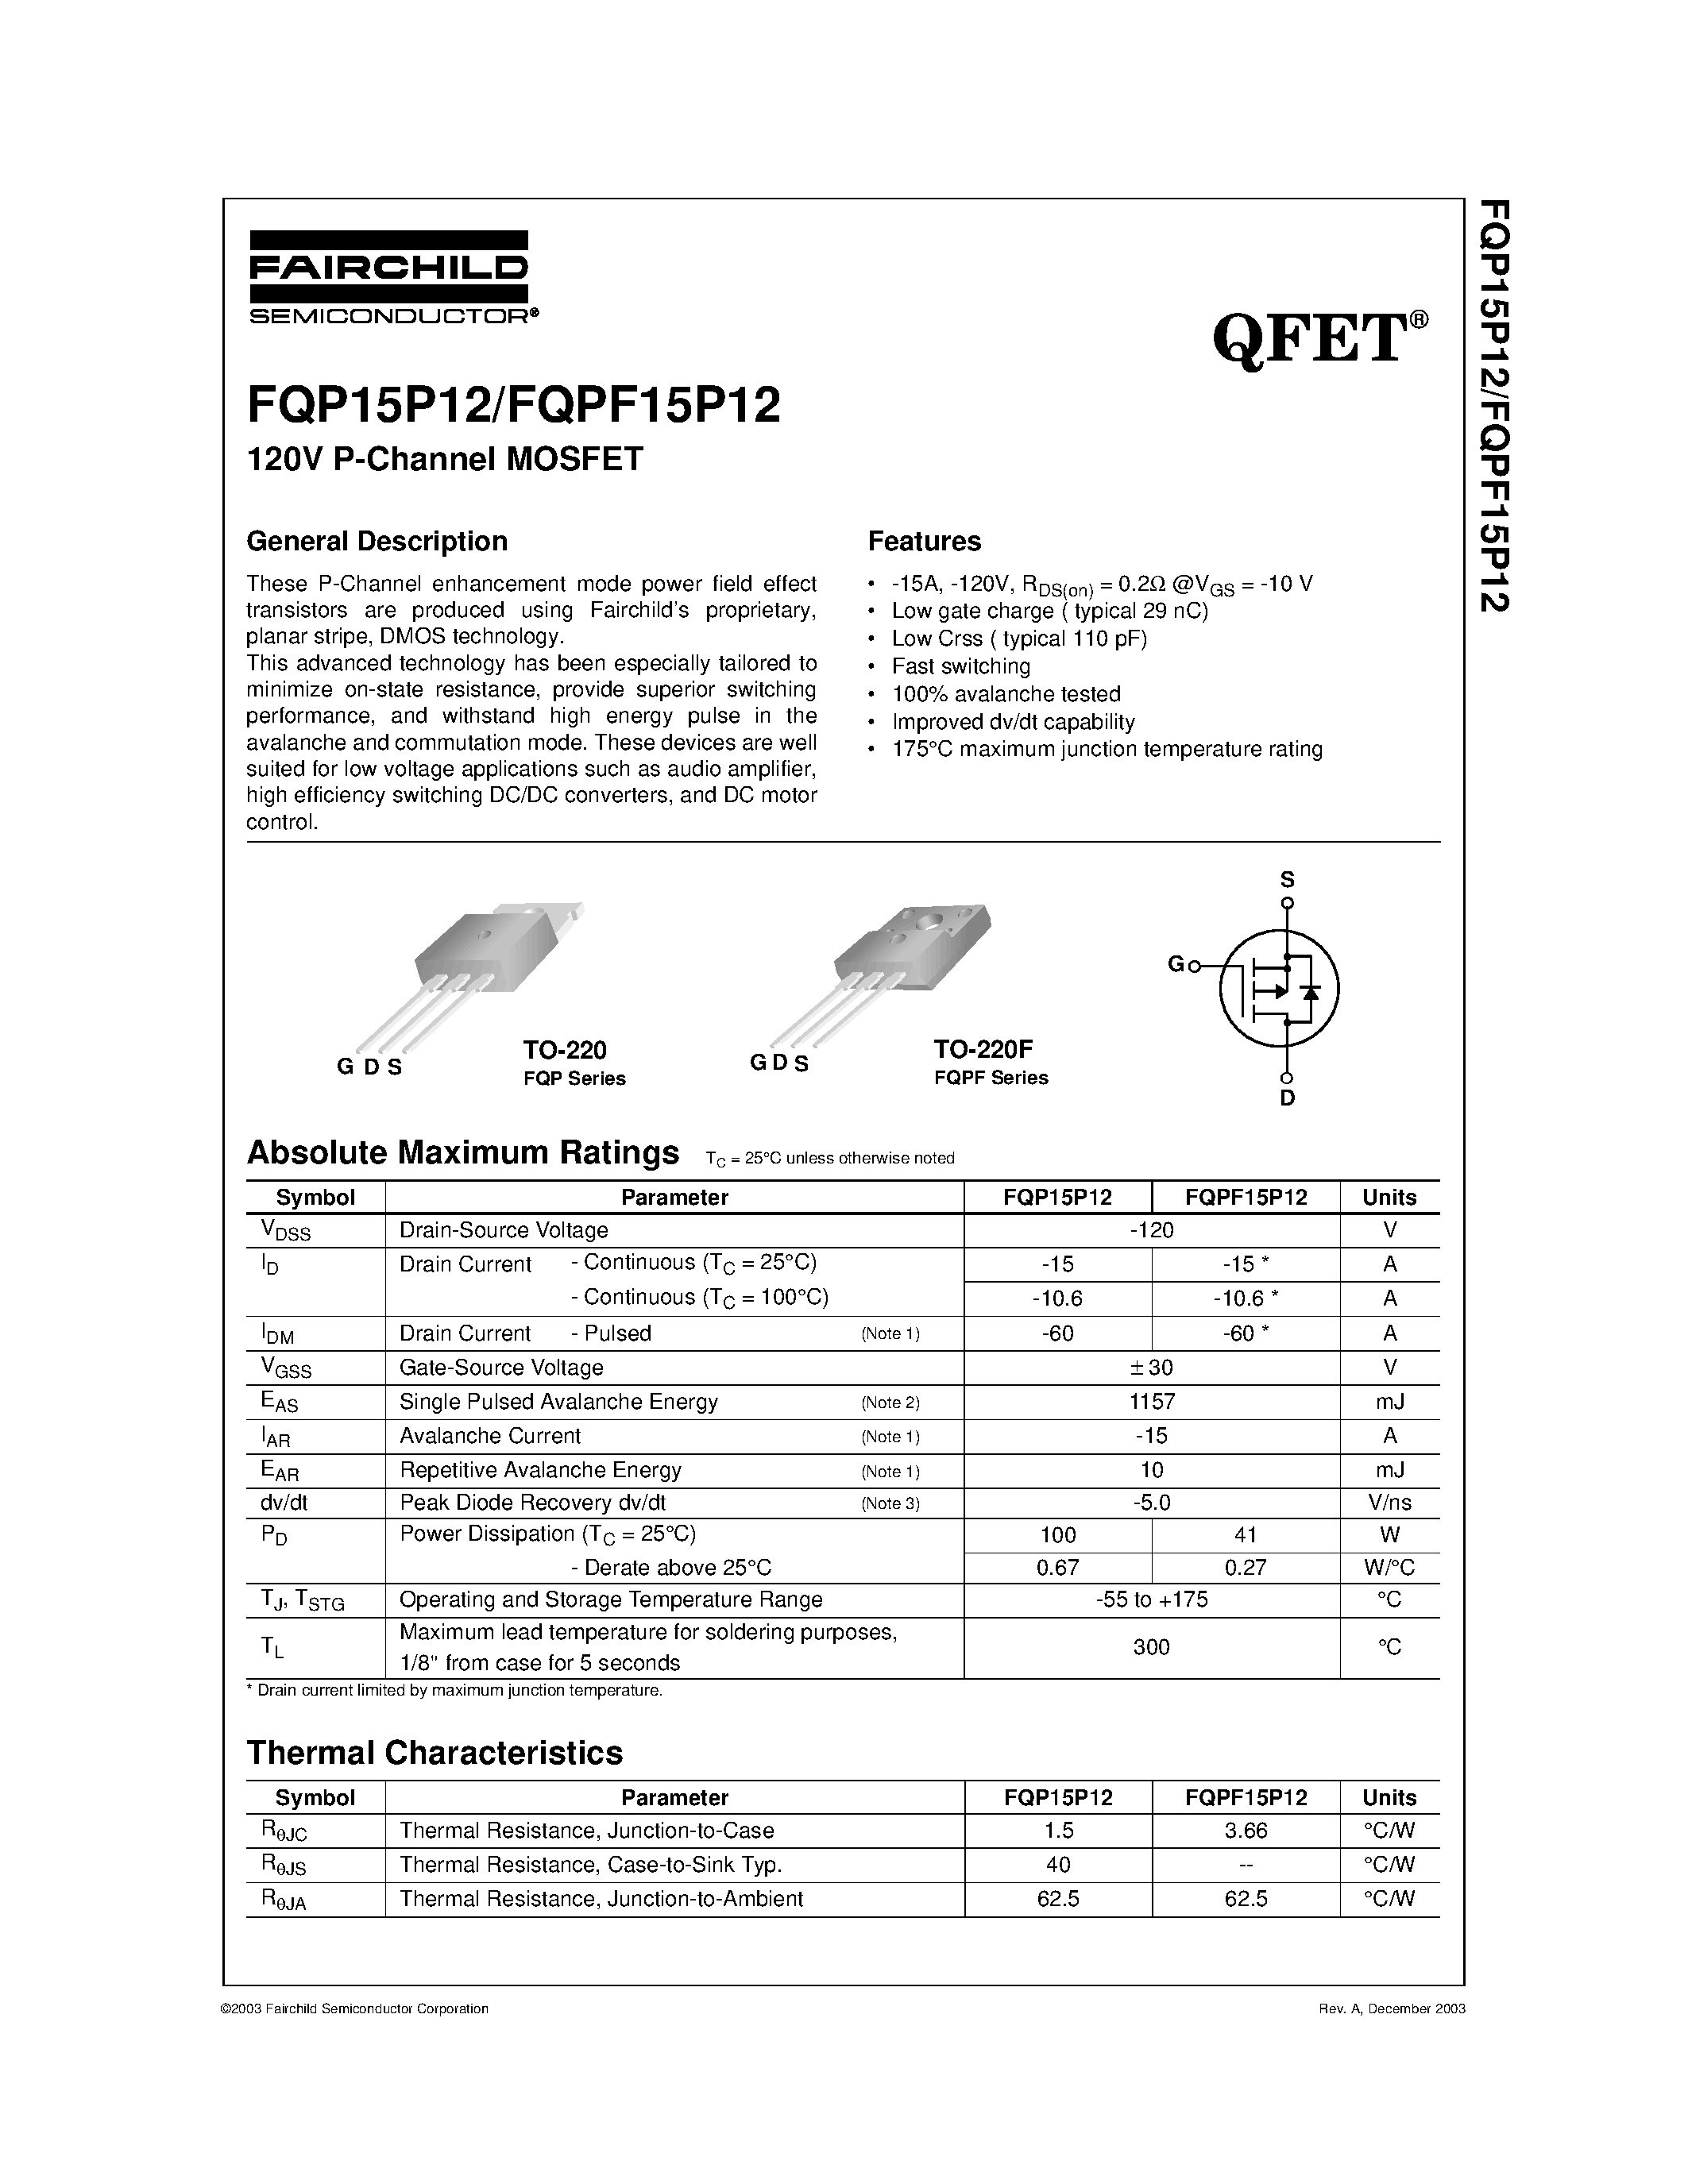 Datasheet FQP15P12 - 120V P-Channel MOSFET page 1